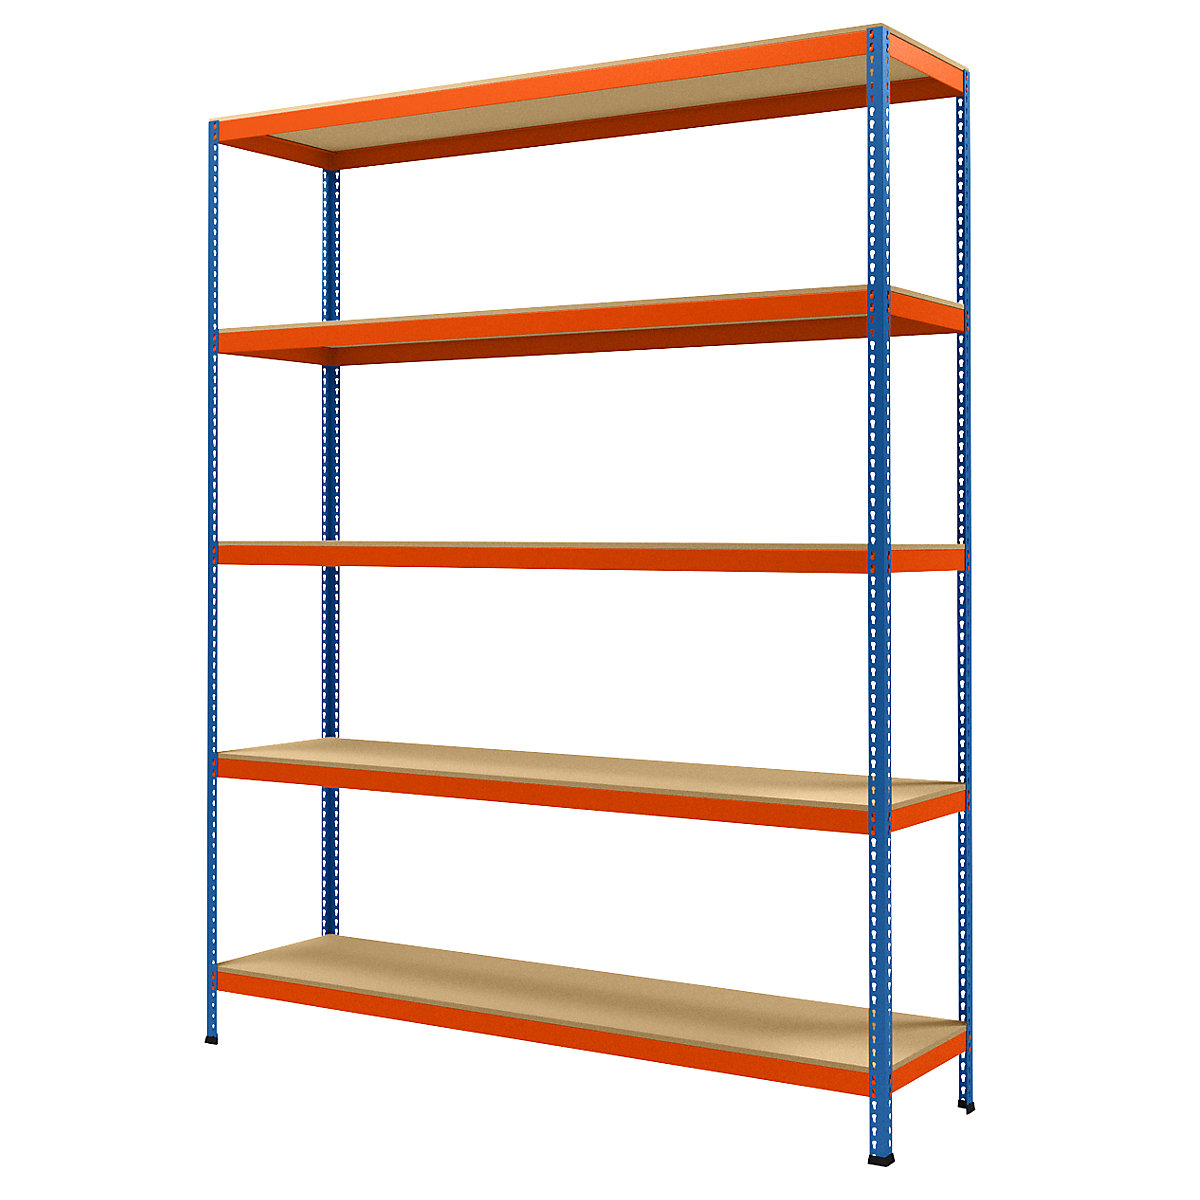 Wide span heavy duty shelving, height 3048 mm, overall depth 621 mm, width 2450 mm